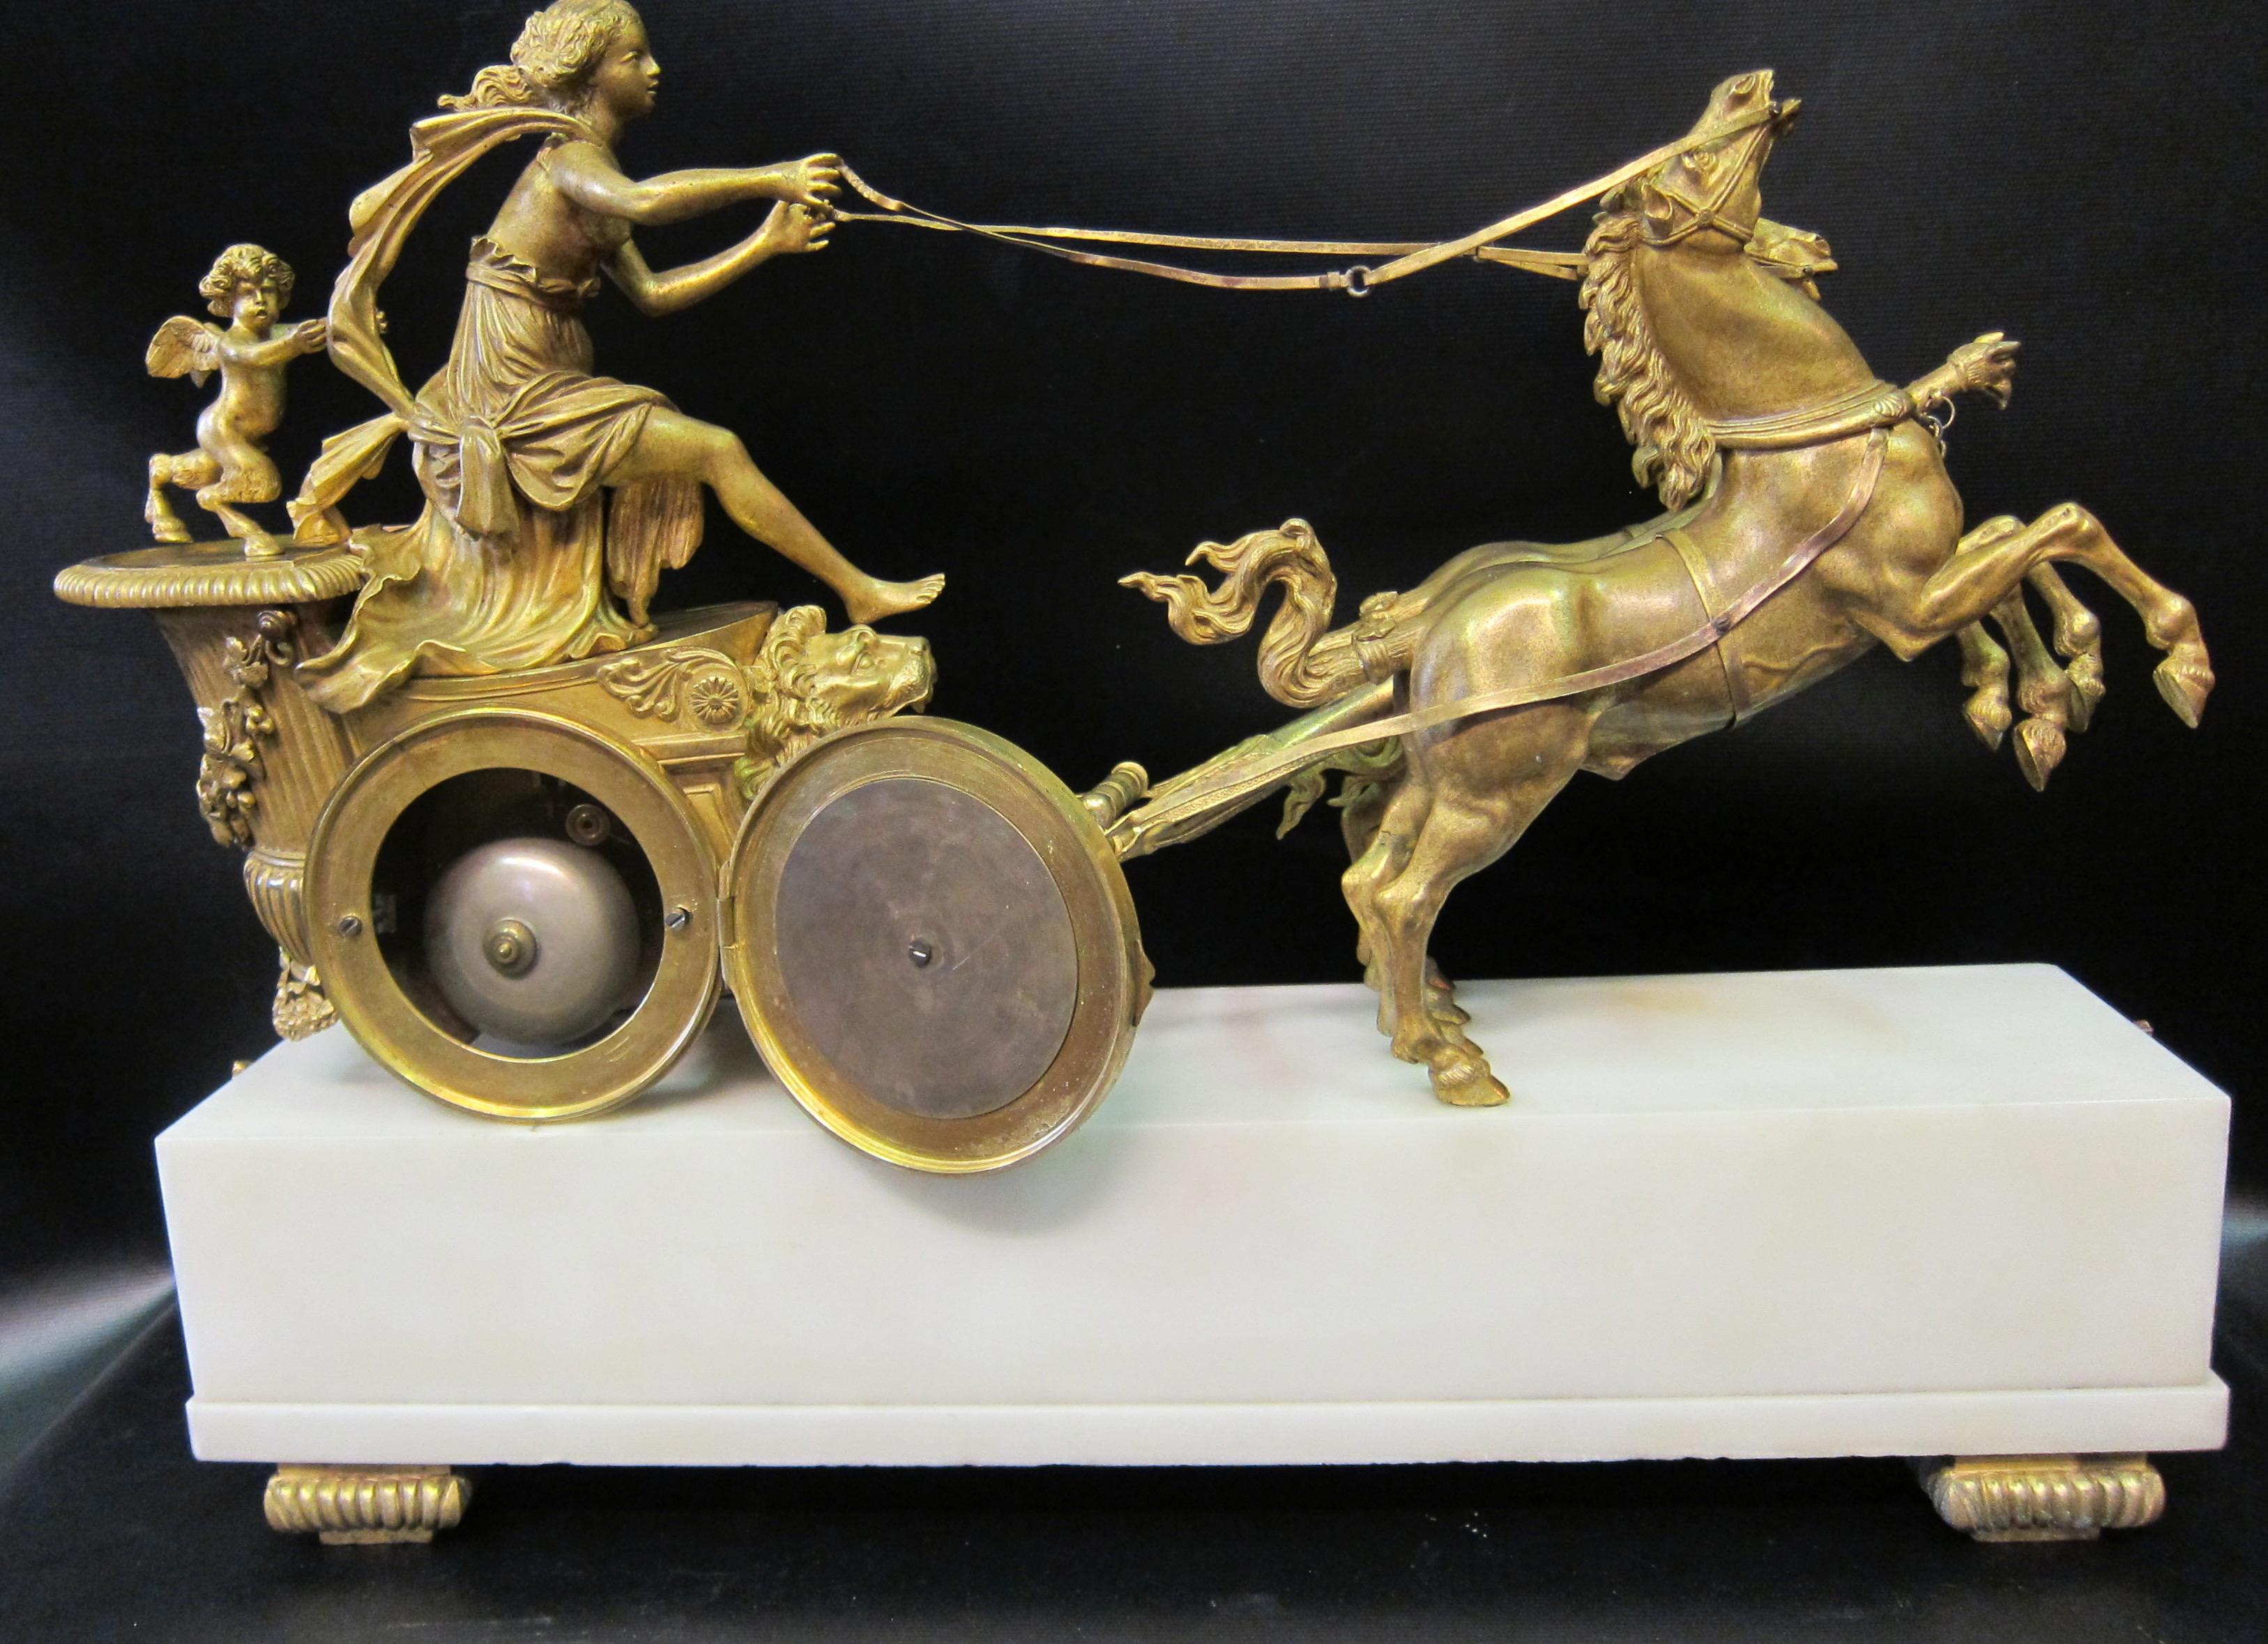 Bronze Vintage Mid-19th Century French Empire Figural Clock